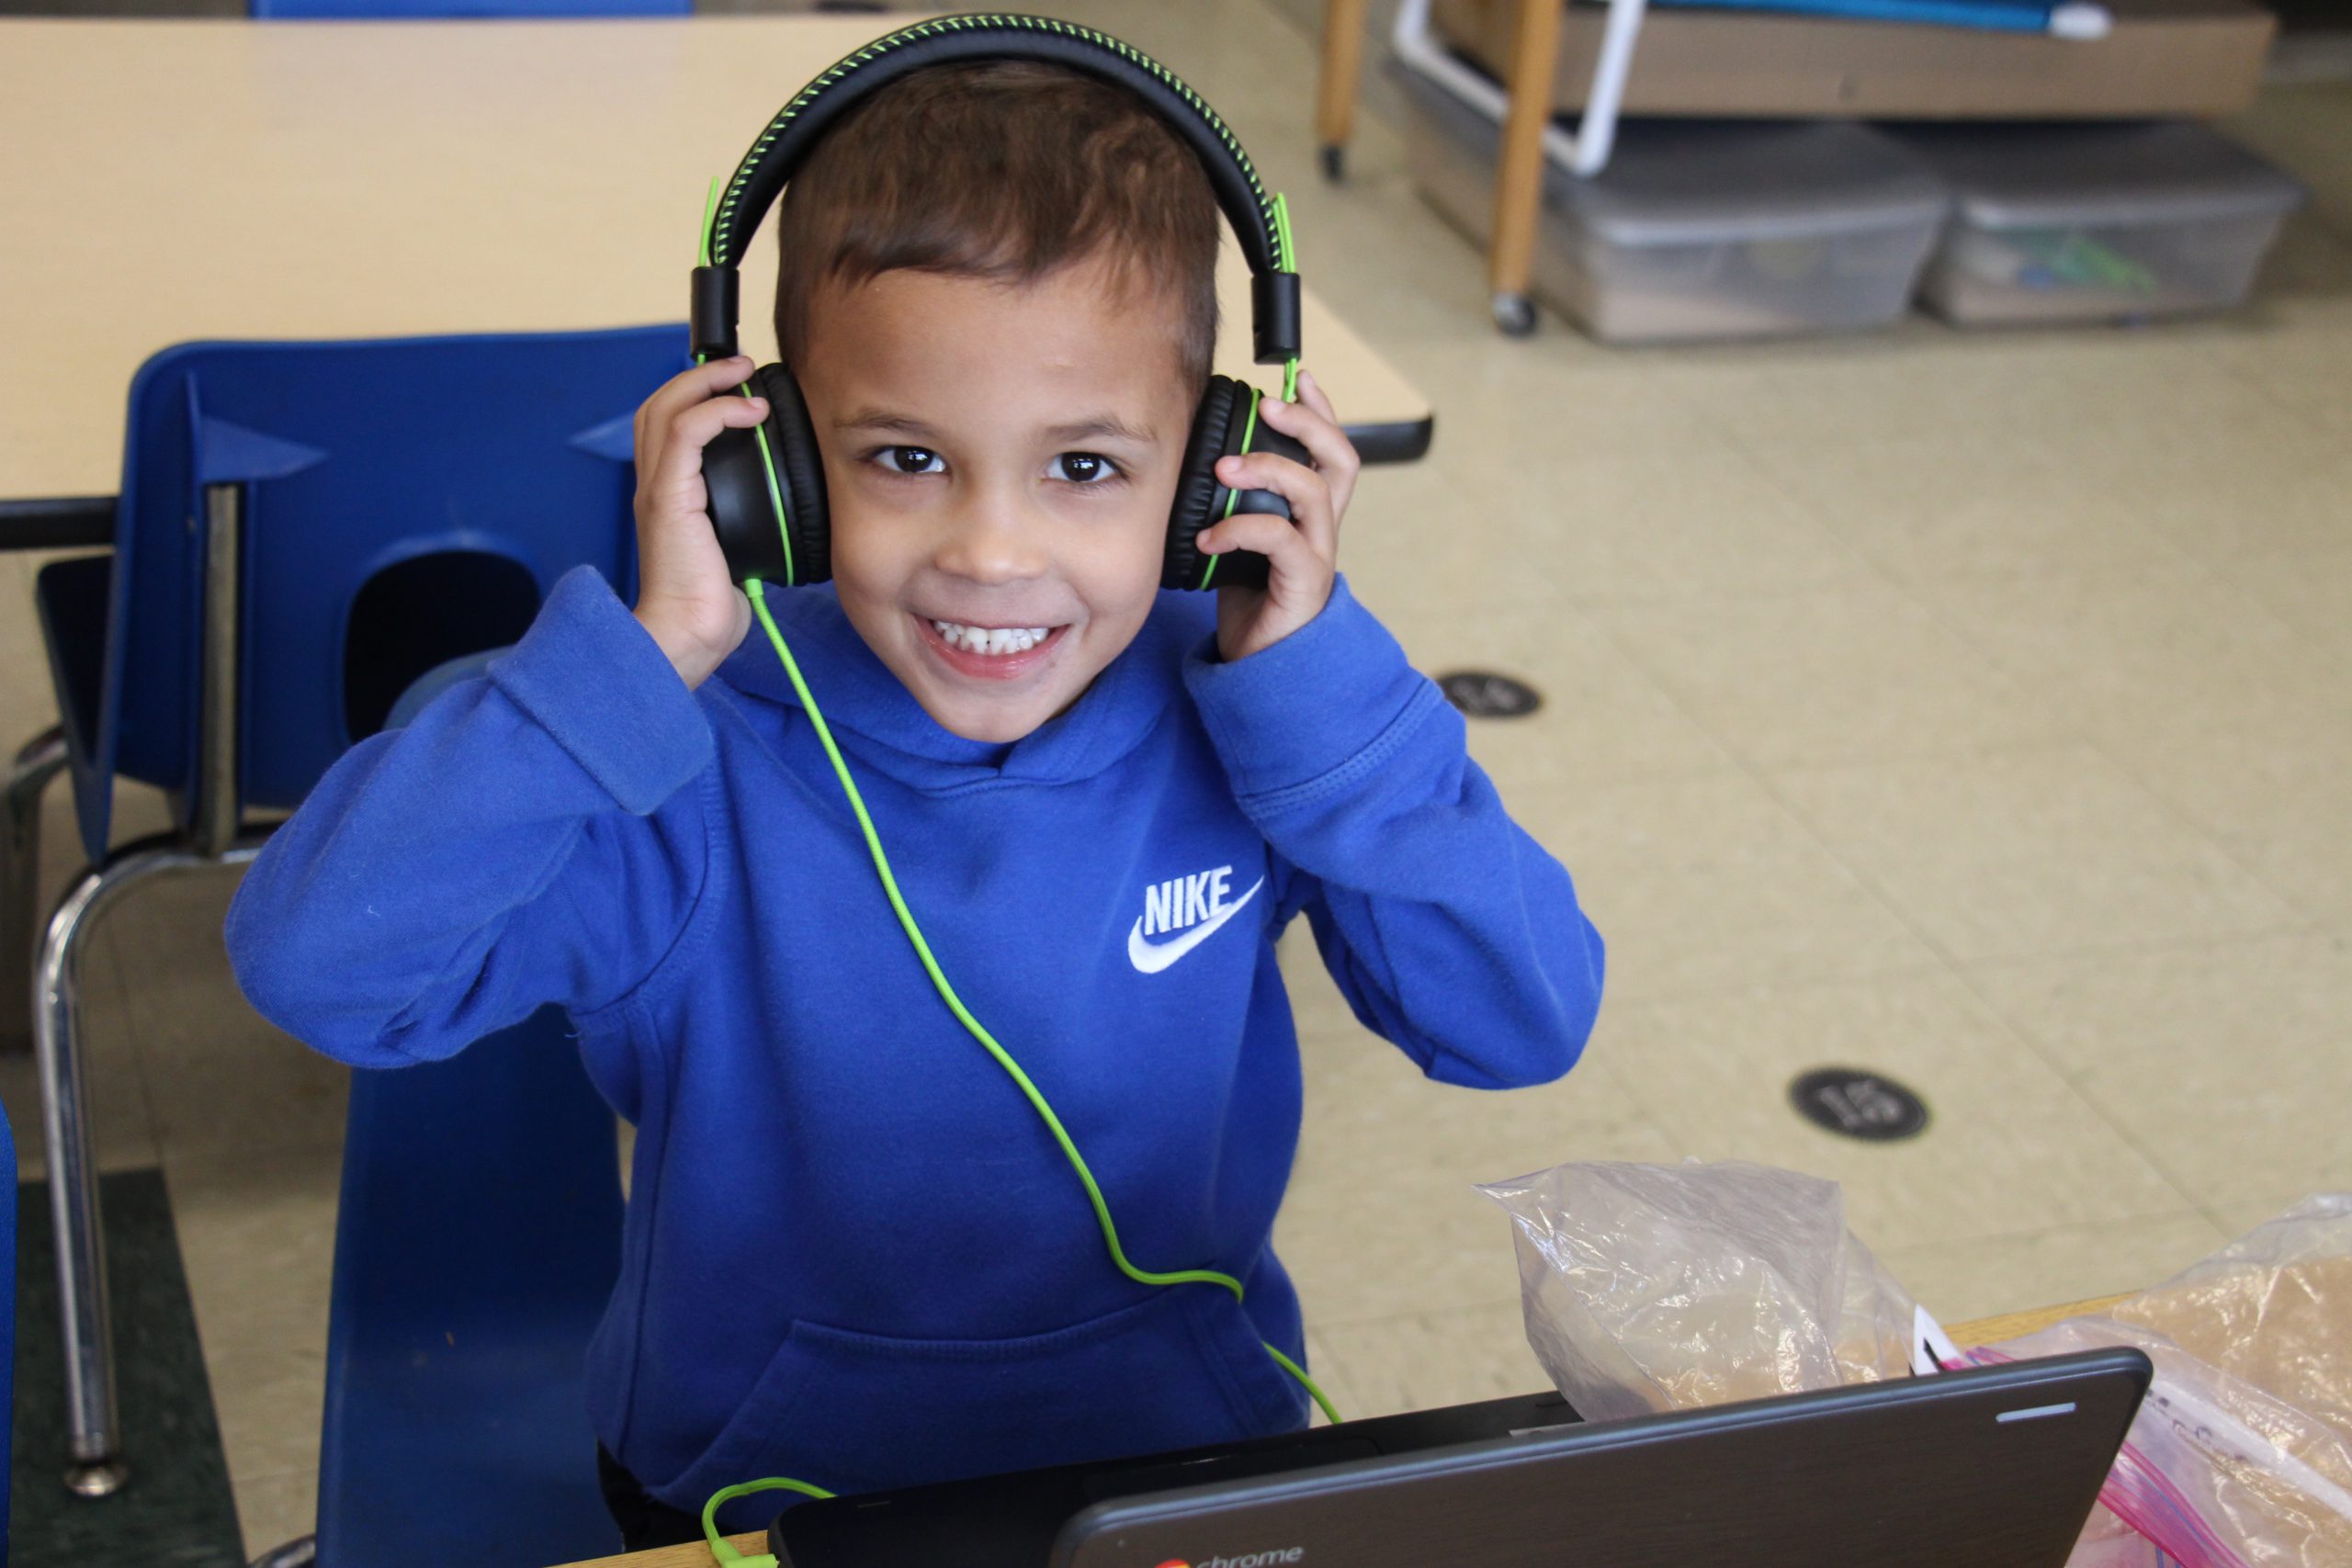 A pre-K boy in a bright blue sweatshirt smiles as he holds his black and green headphones over his ears. He has short dark hair and there is a Chromebook in front of him.